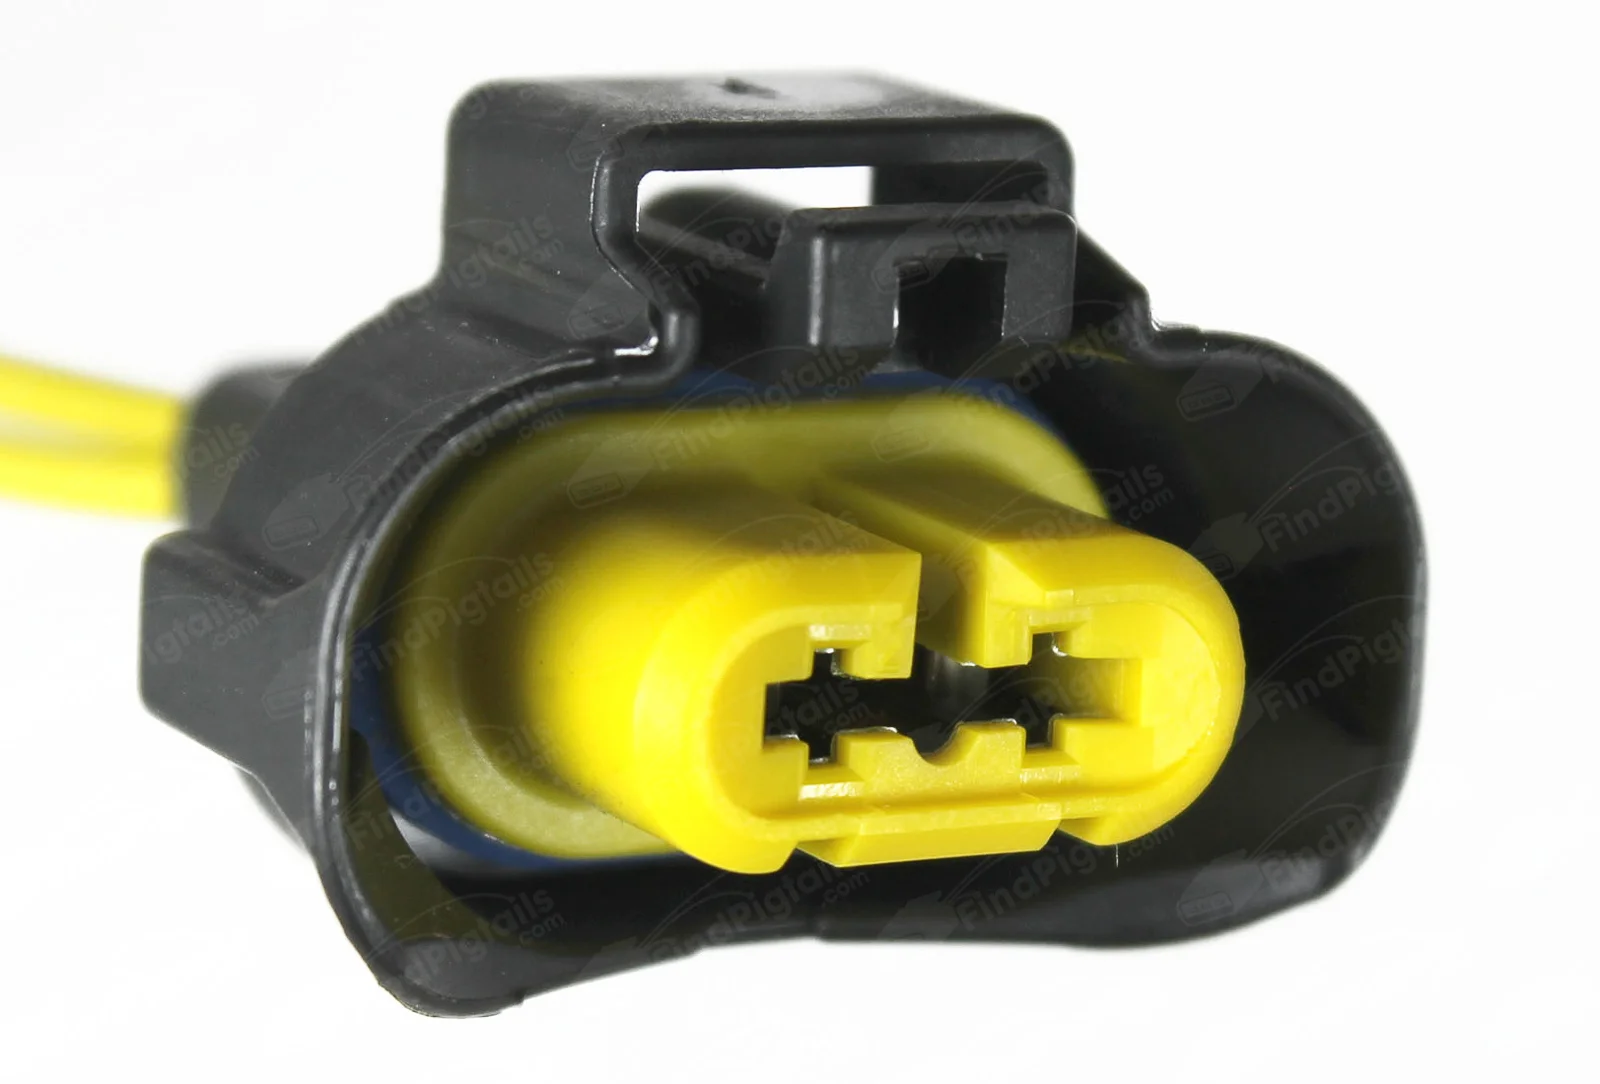 L42B2 is a 2-pin automotive connector which serves at least 409 functions for 36+ vehicles.